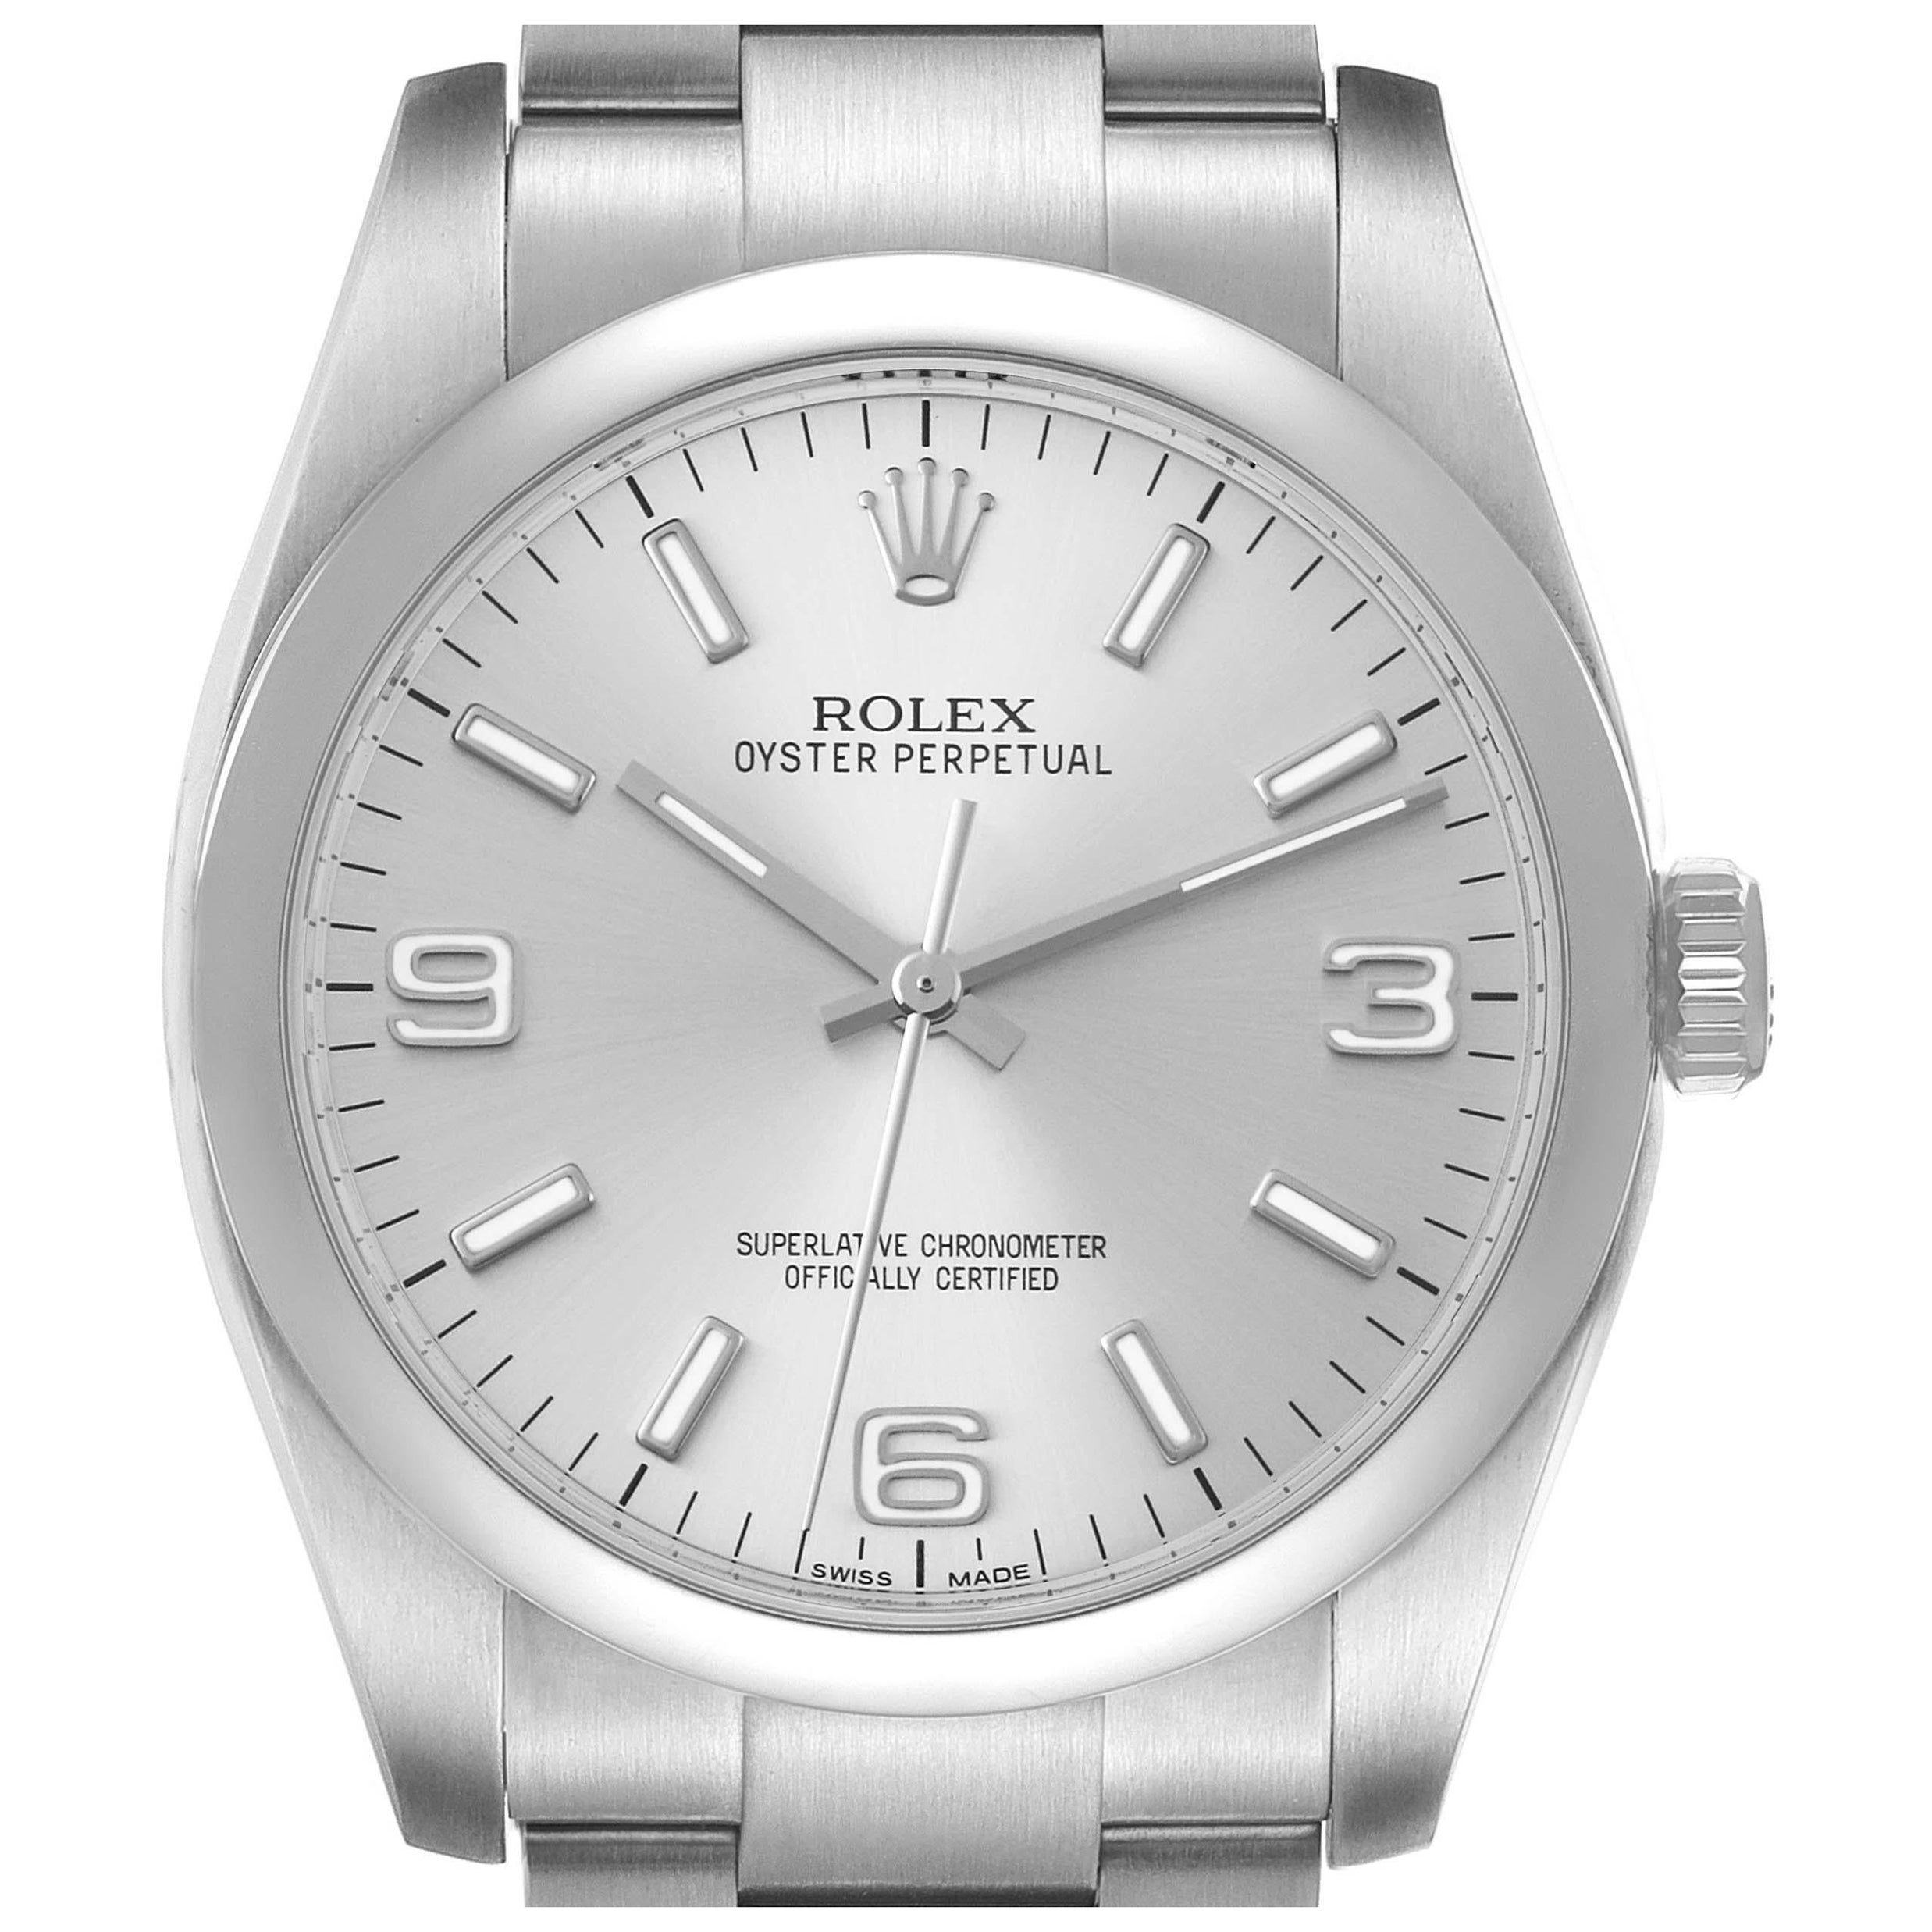 Rolex Oyster Perpetual 36mm Silver Dial Steel Mens Watch 116000